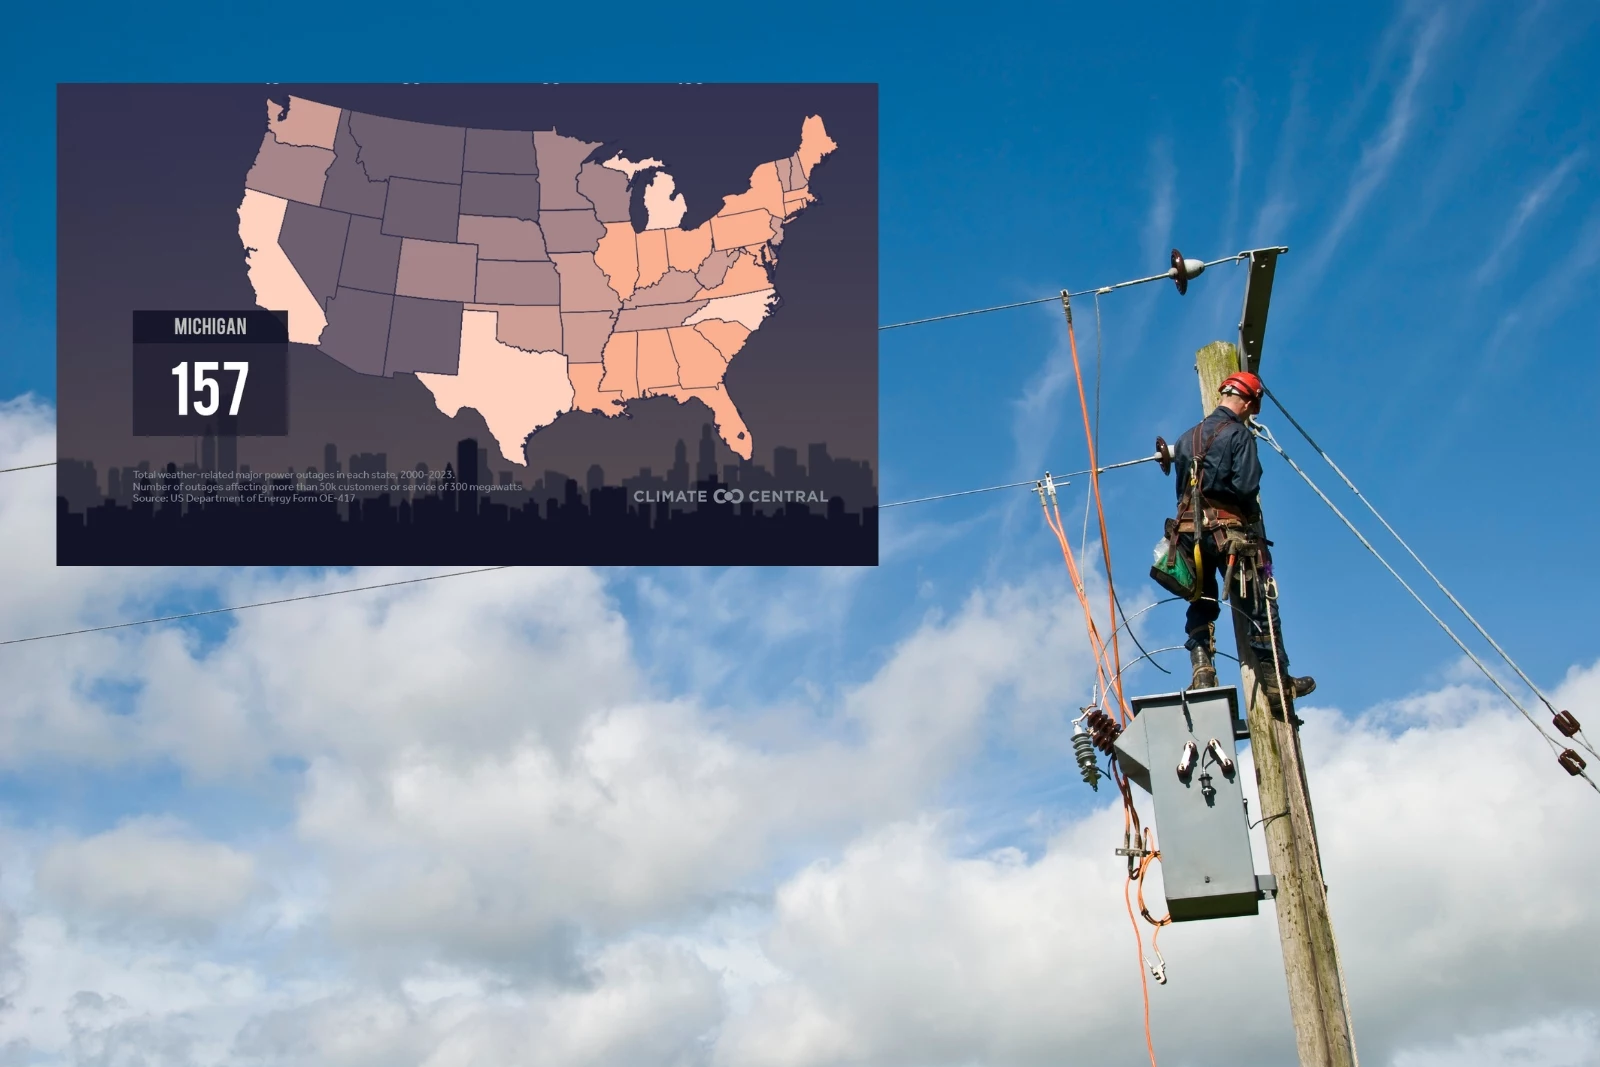 Michigan: One of the Least Reliable Power Grids in the Nation